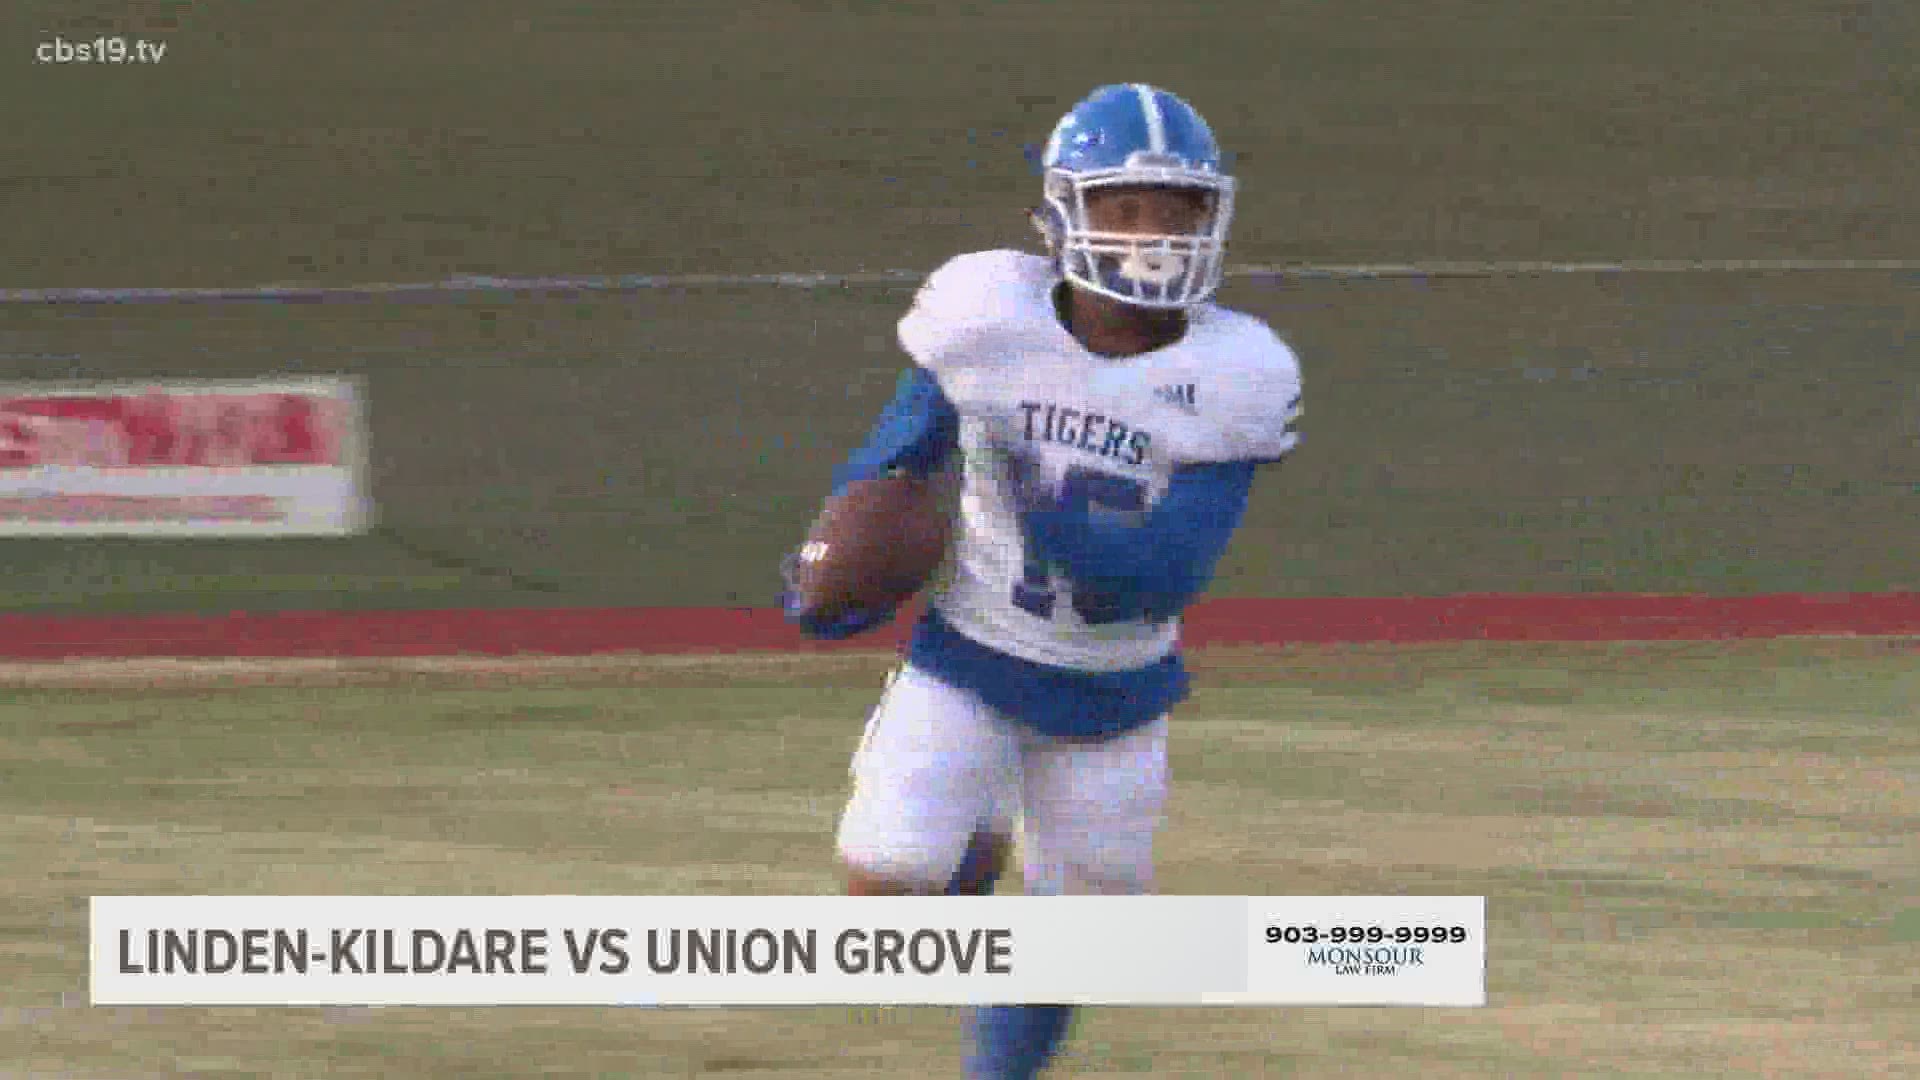 The Linden-Kildare Tigers traveled to Union Grove to take on the Lions under the Thursday Night Lights!